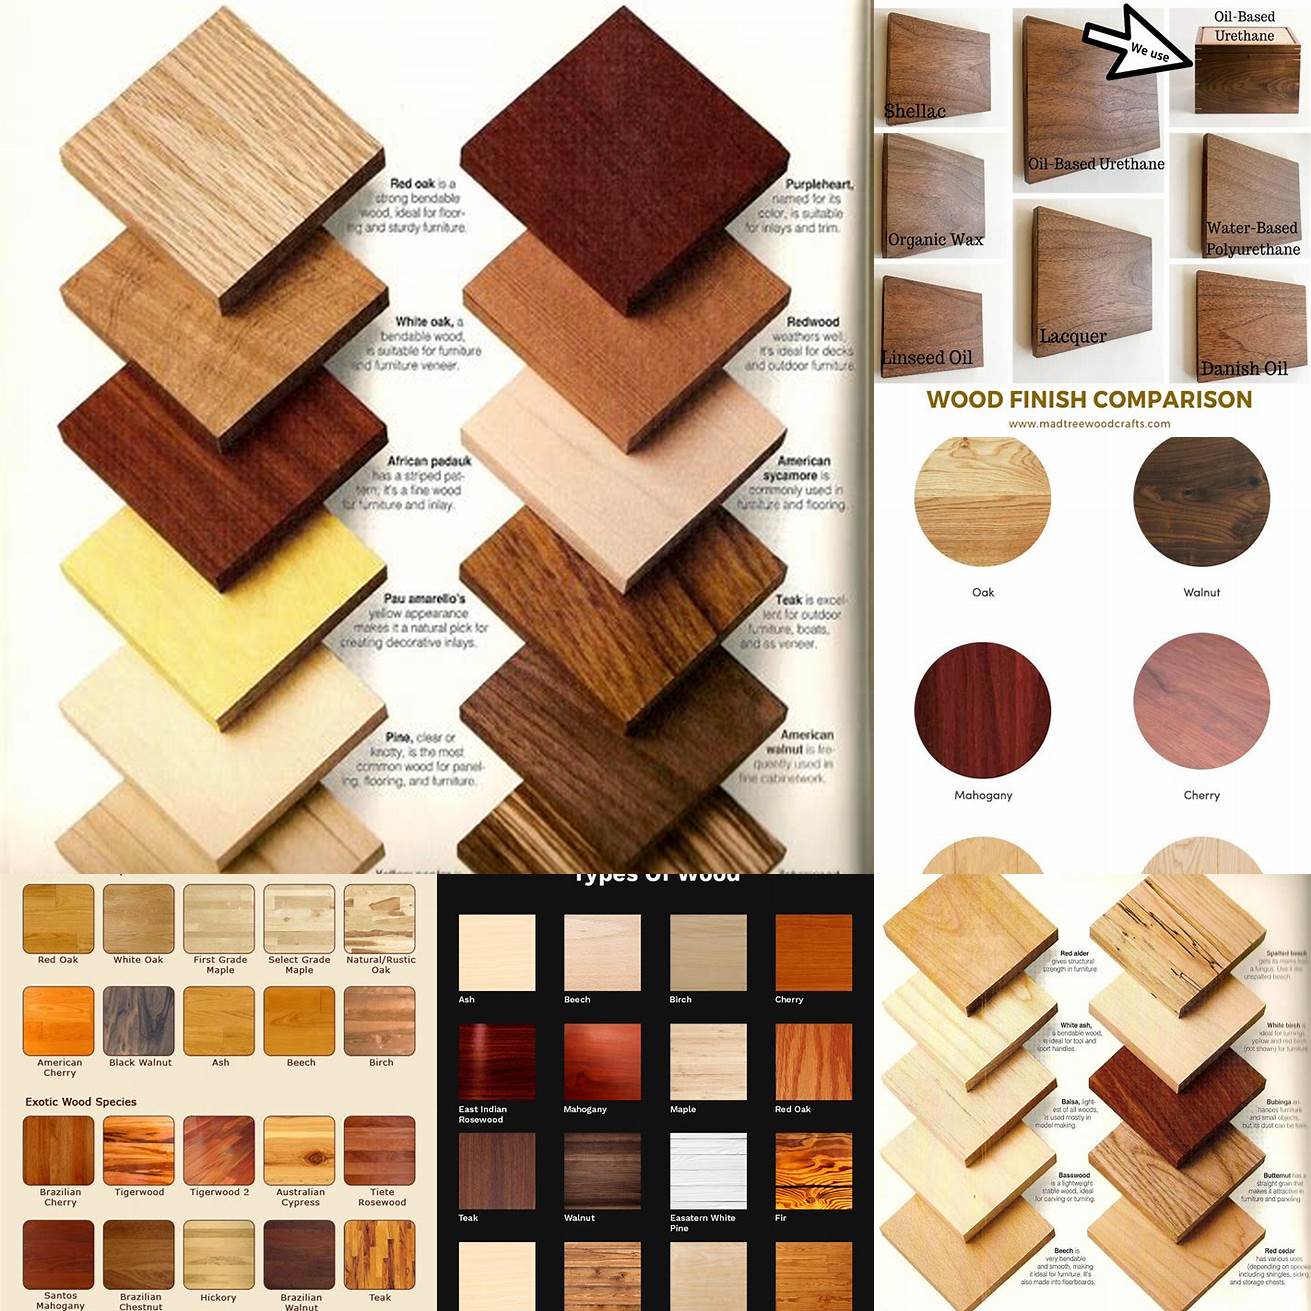 Comparing different types of wood finishes